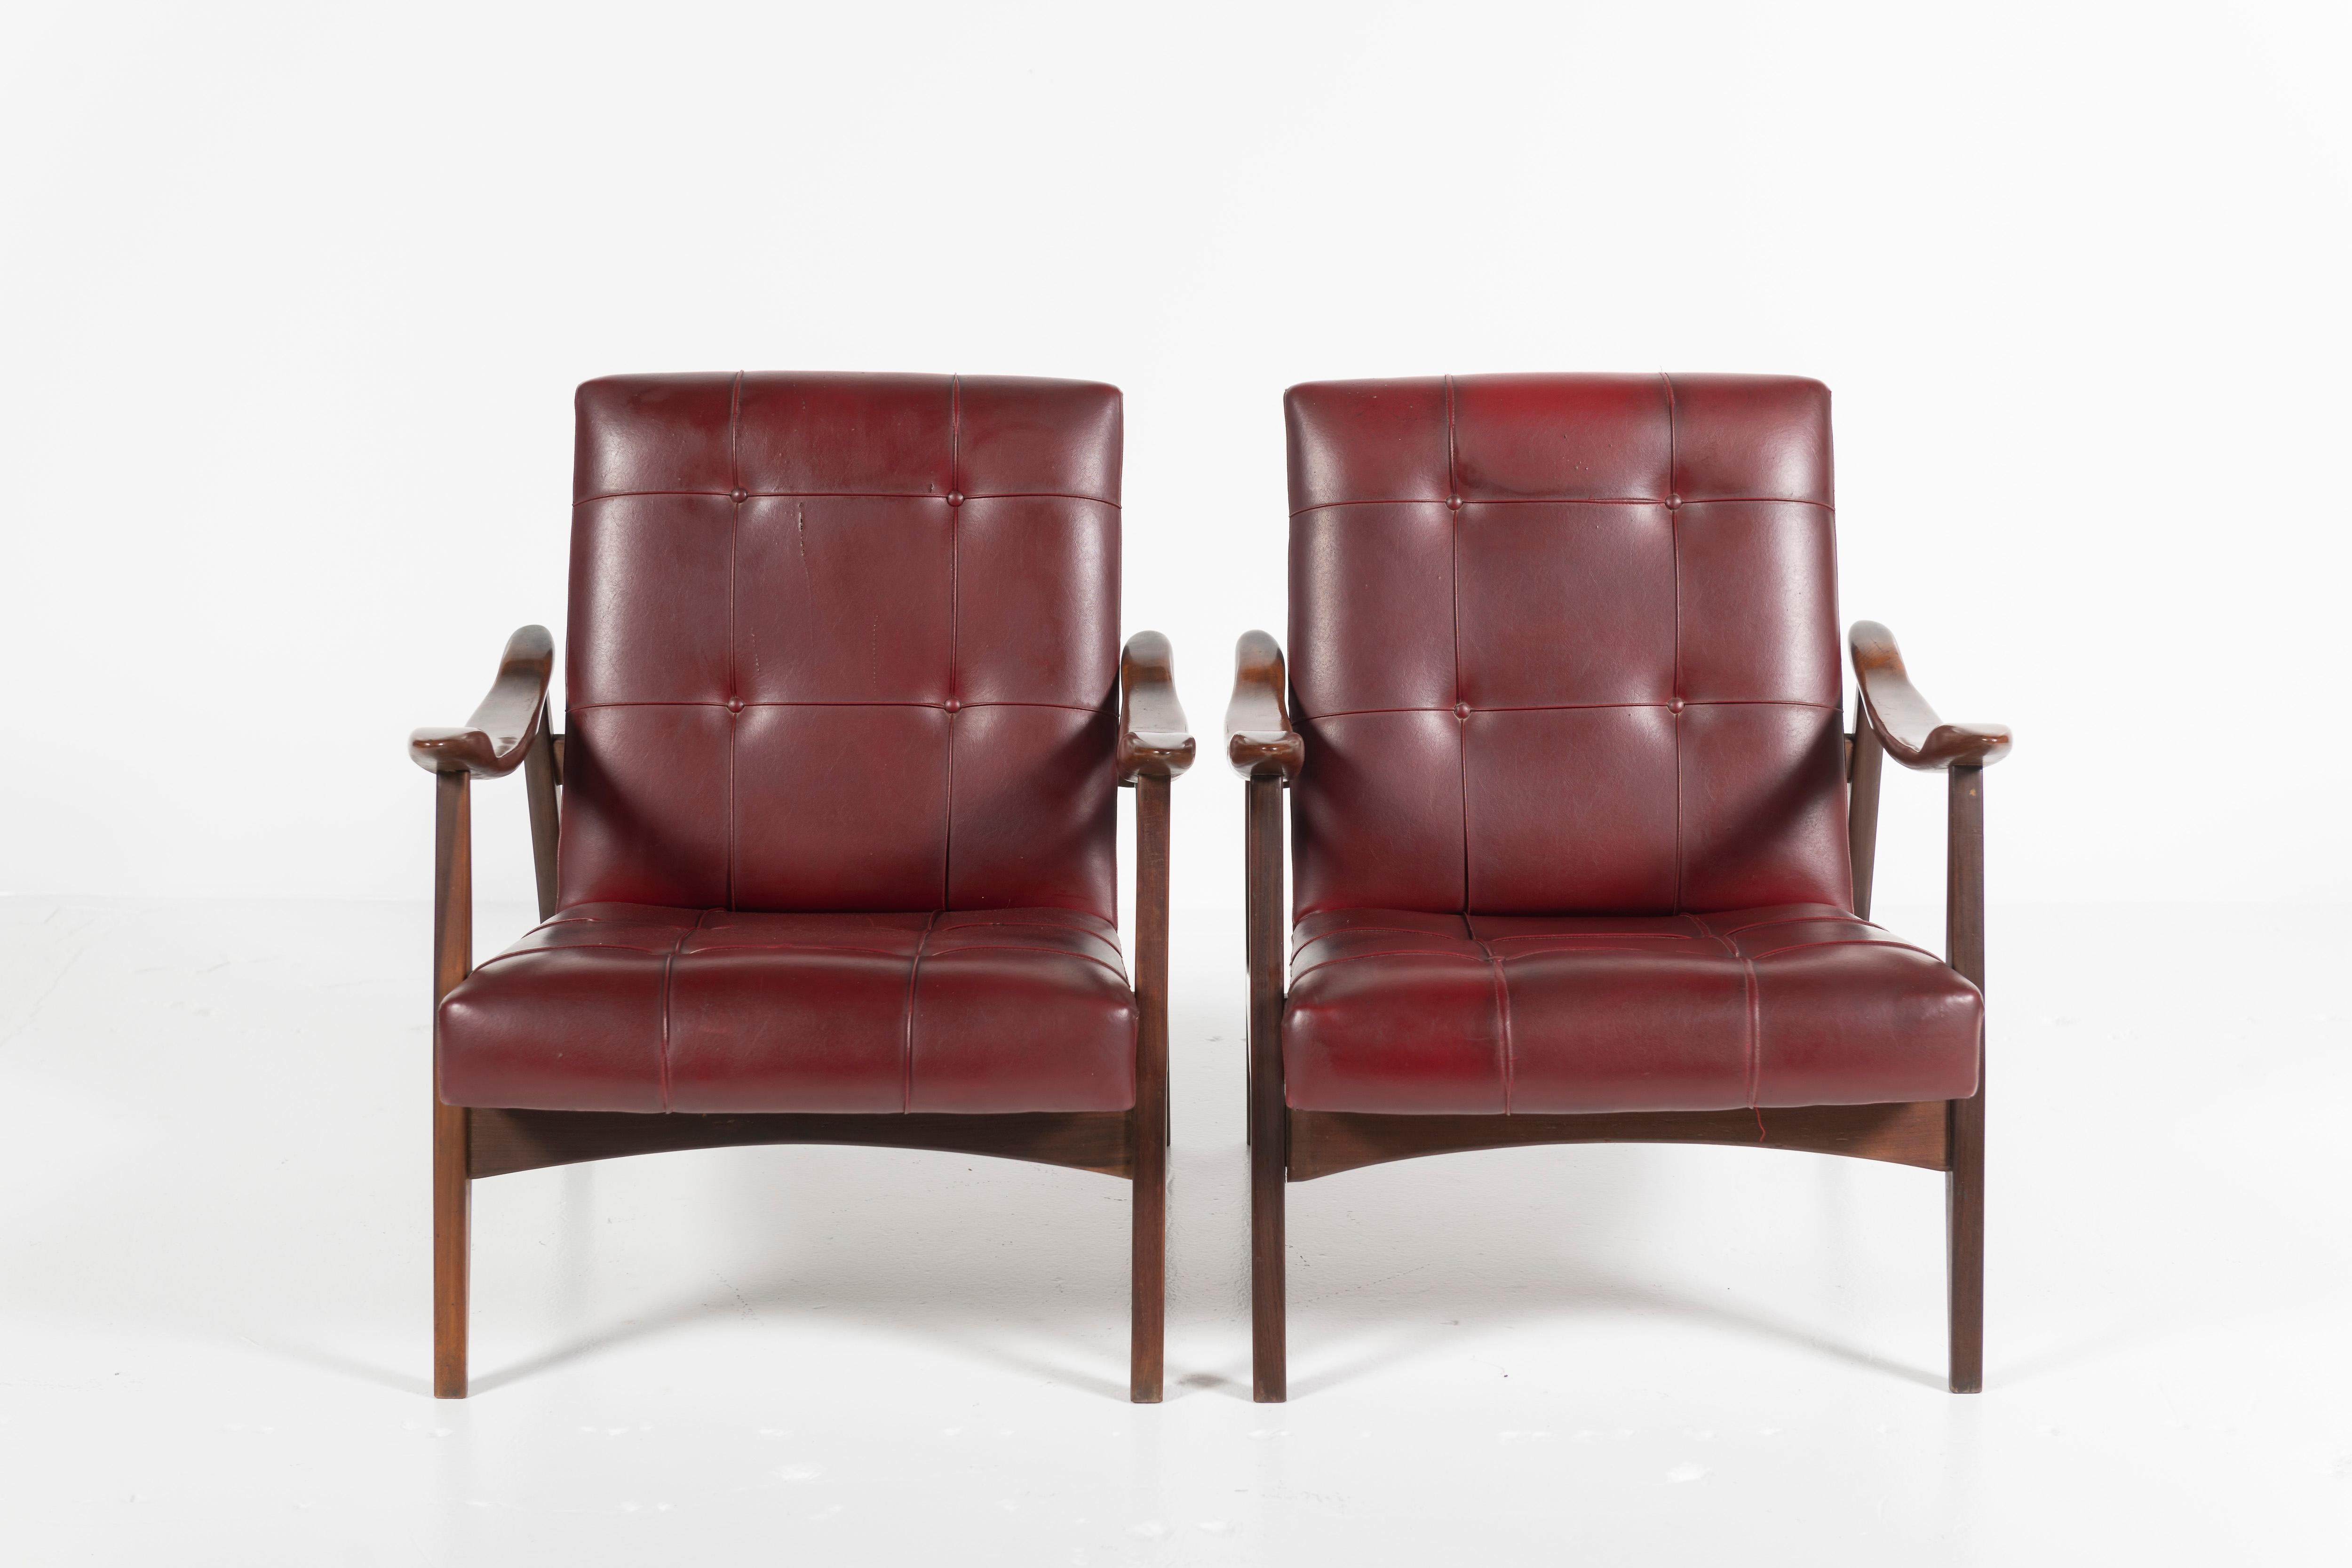 Pair of 20th Century Vintage Tufted Leather and Wood Arm Chairs, Italian For Sale 1